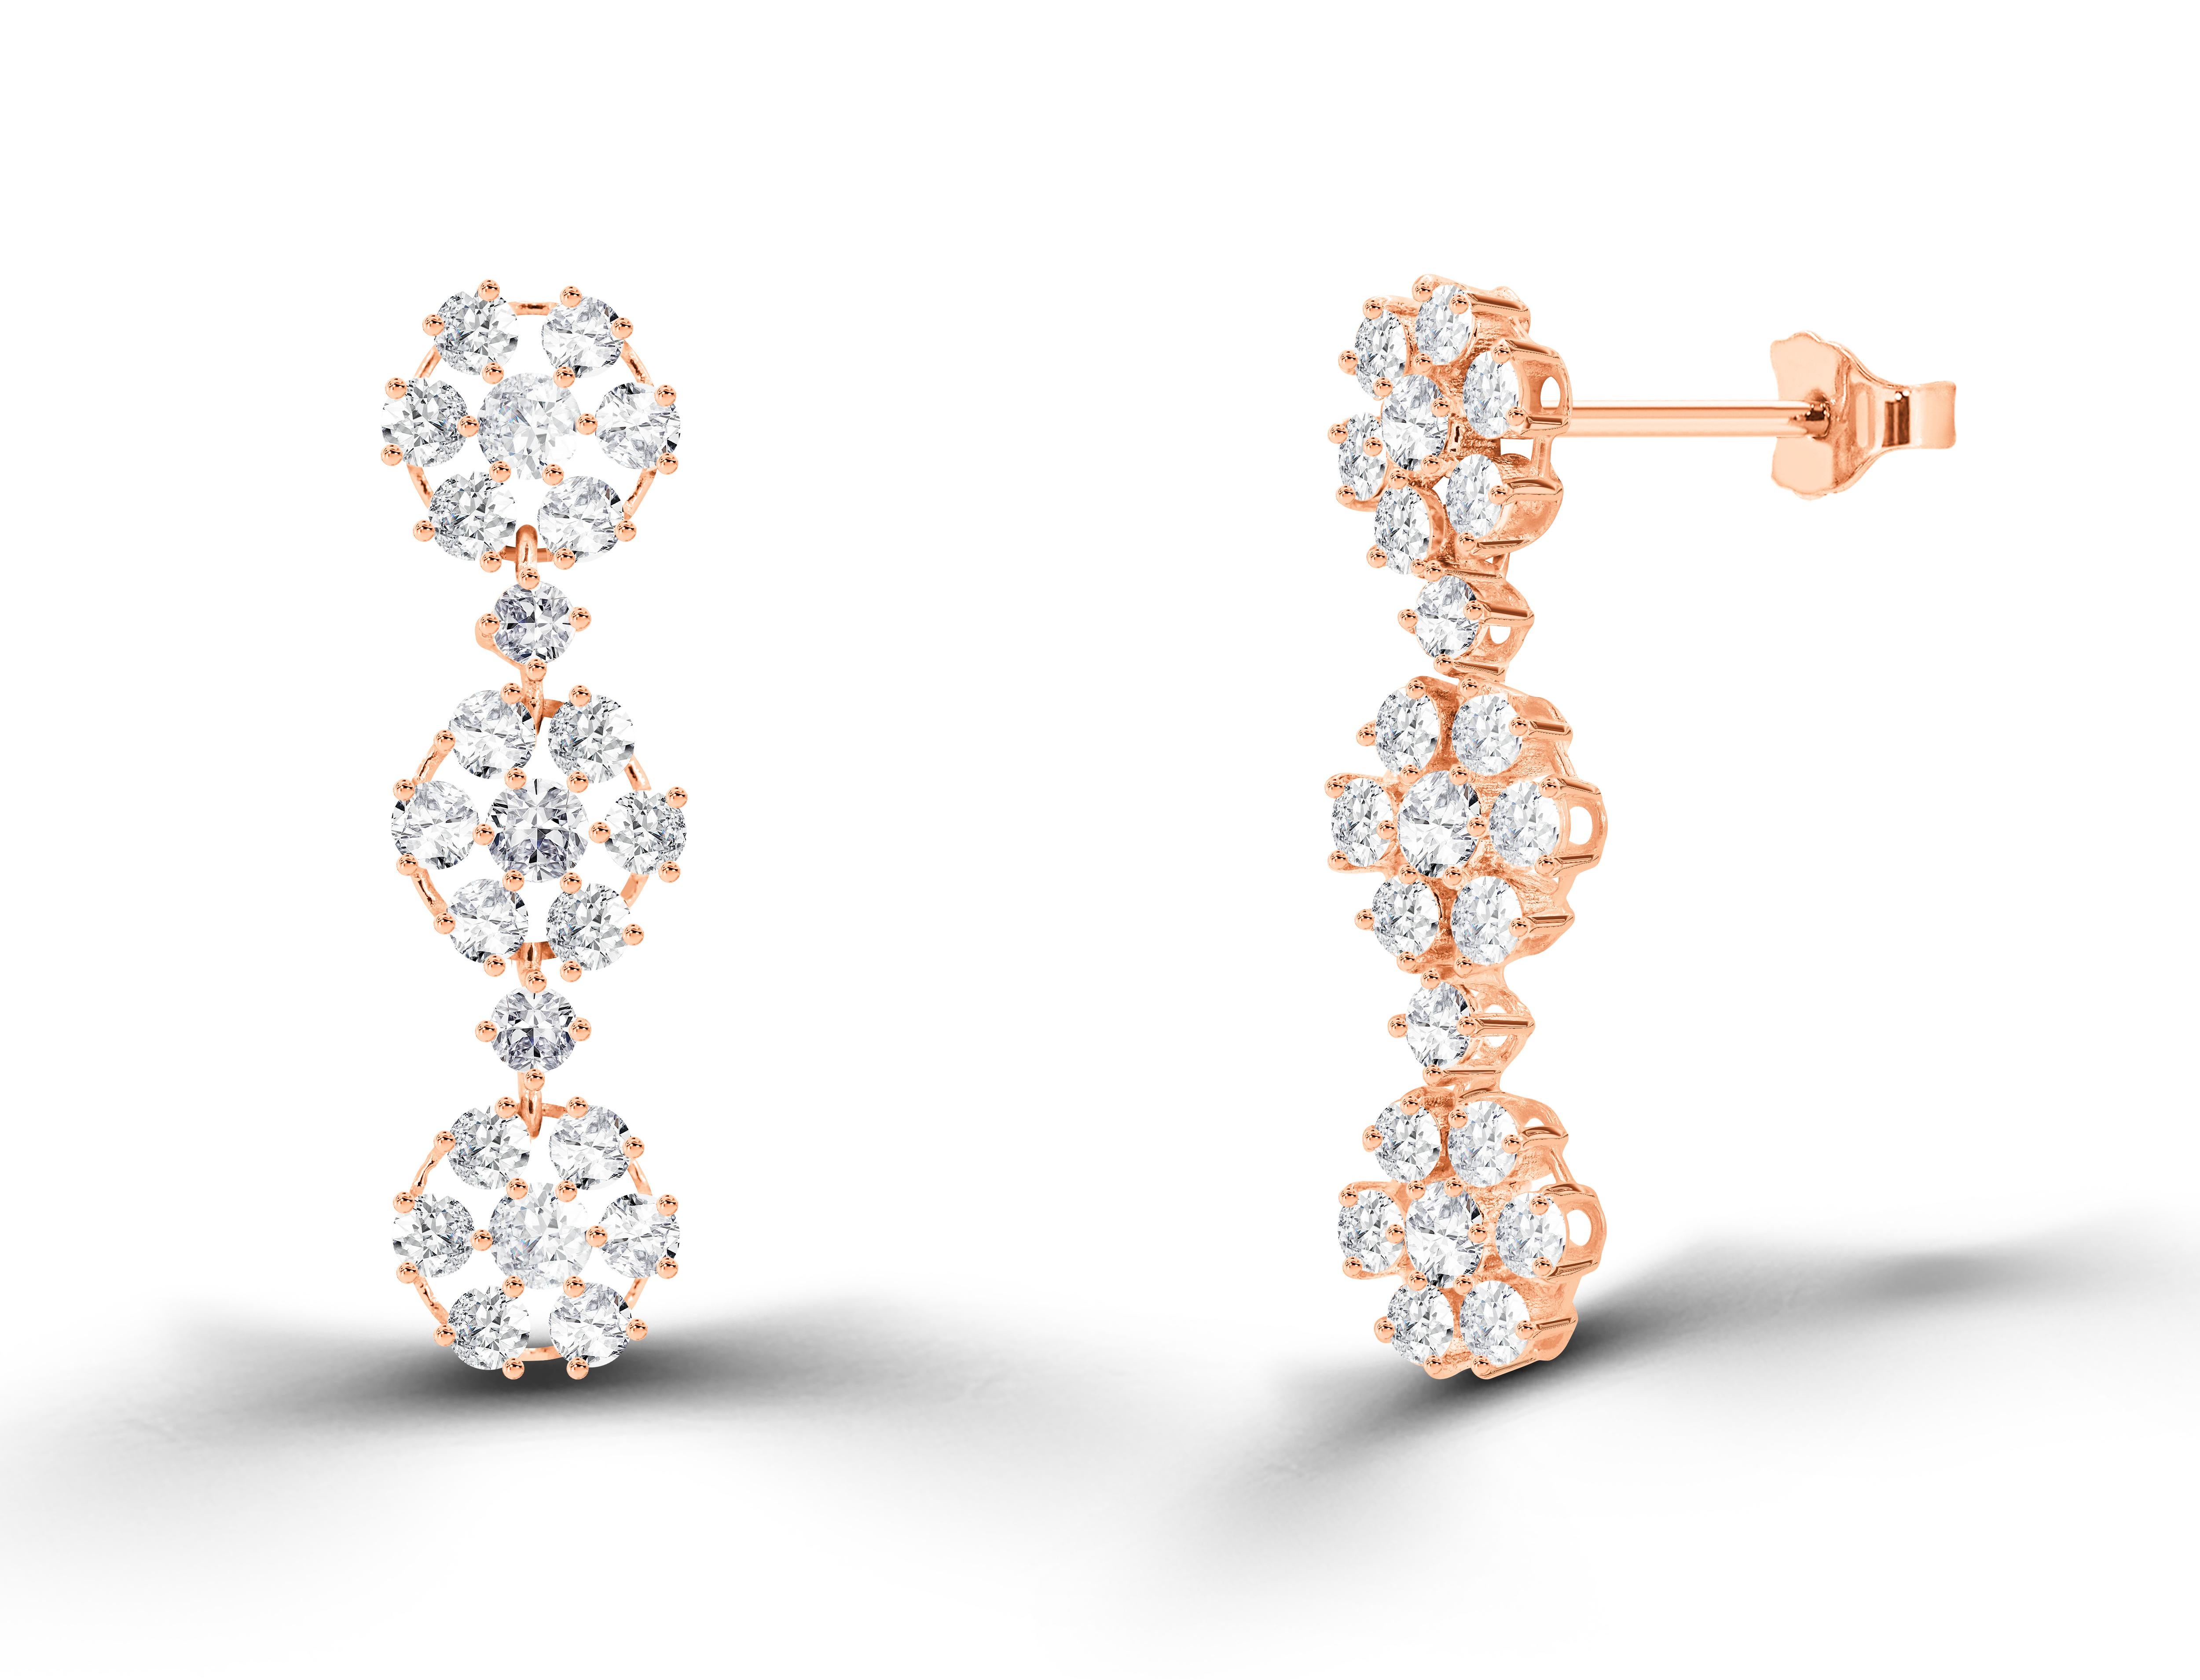 2.08 Ct Diamond Flower Drop Earrings in 18K Gold, Round Brilliant cut diamond earrings, Natural Diamond Earrings, Cluster dangle earrings, Heavy End Earrings.

Jewels By Tarry presents to you a beautiful Earring collection with natural diamonds that